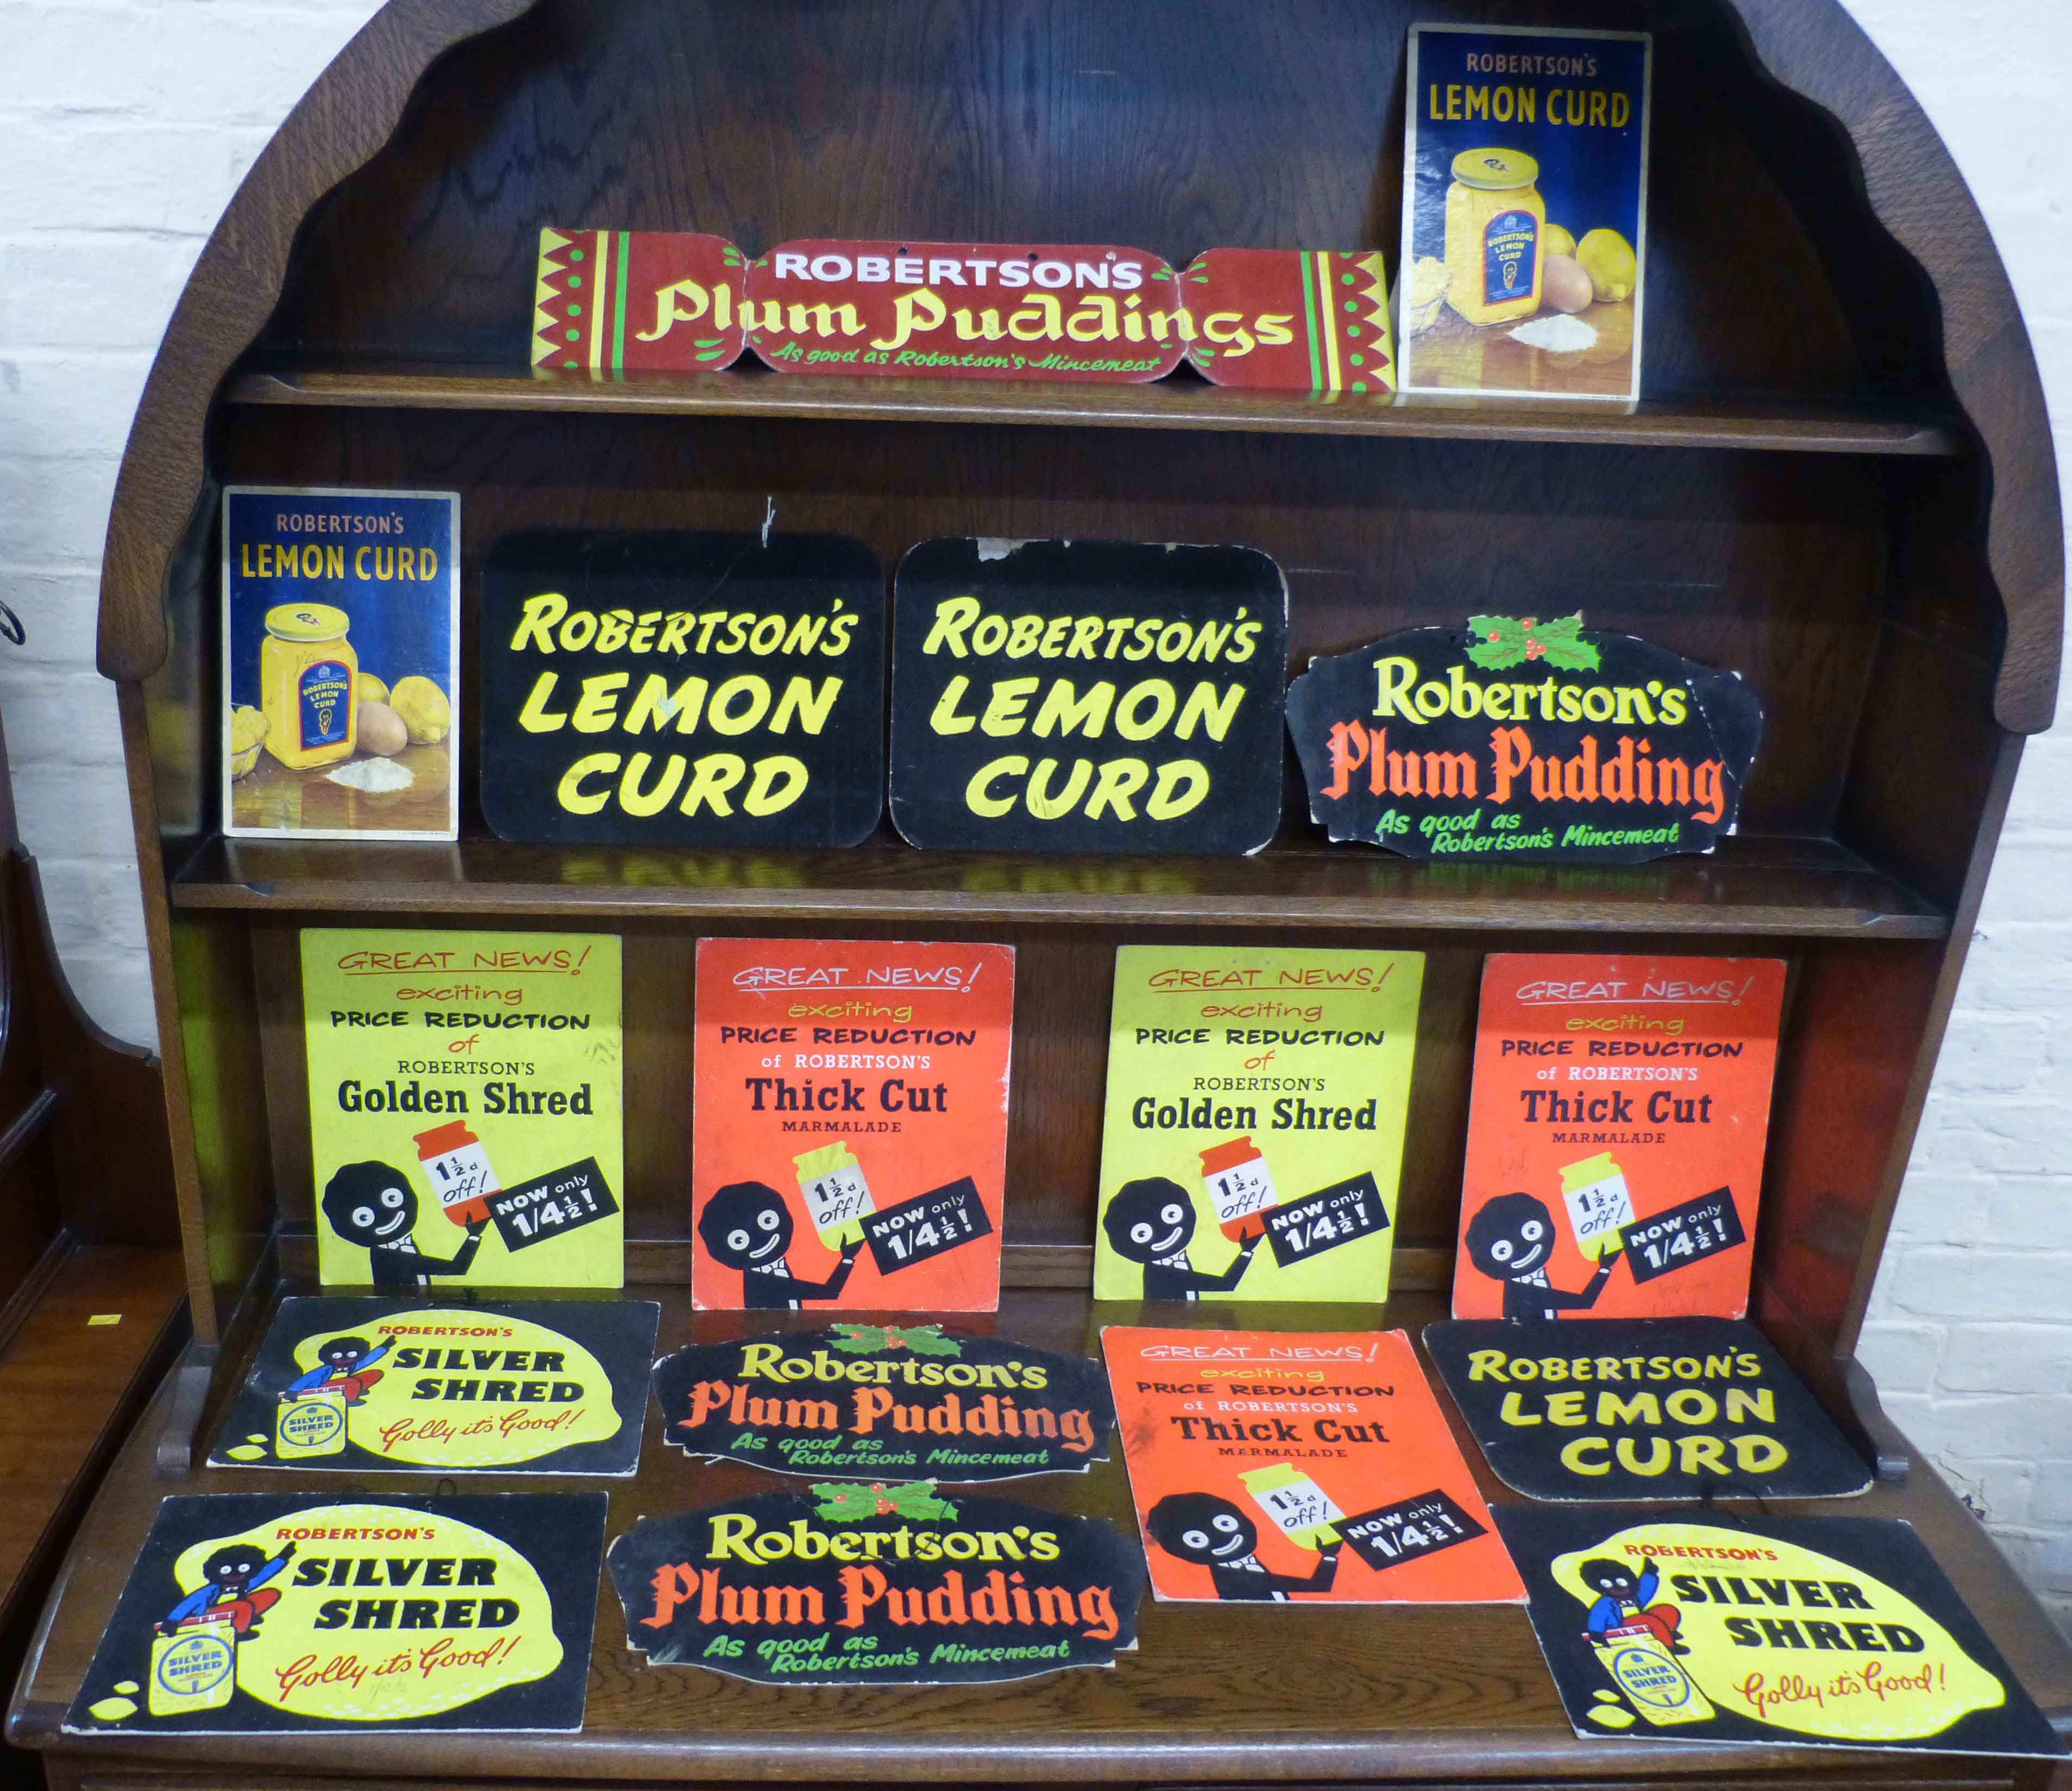 Shop advertising cards, Robertsons silver shred (3) Lemon Curd (4) Golden Shred (1), Thic cut (4_) - Image 2 of 6